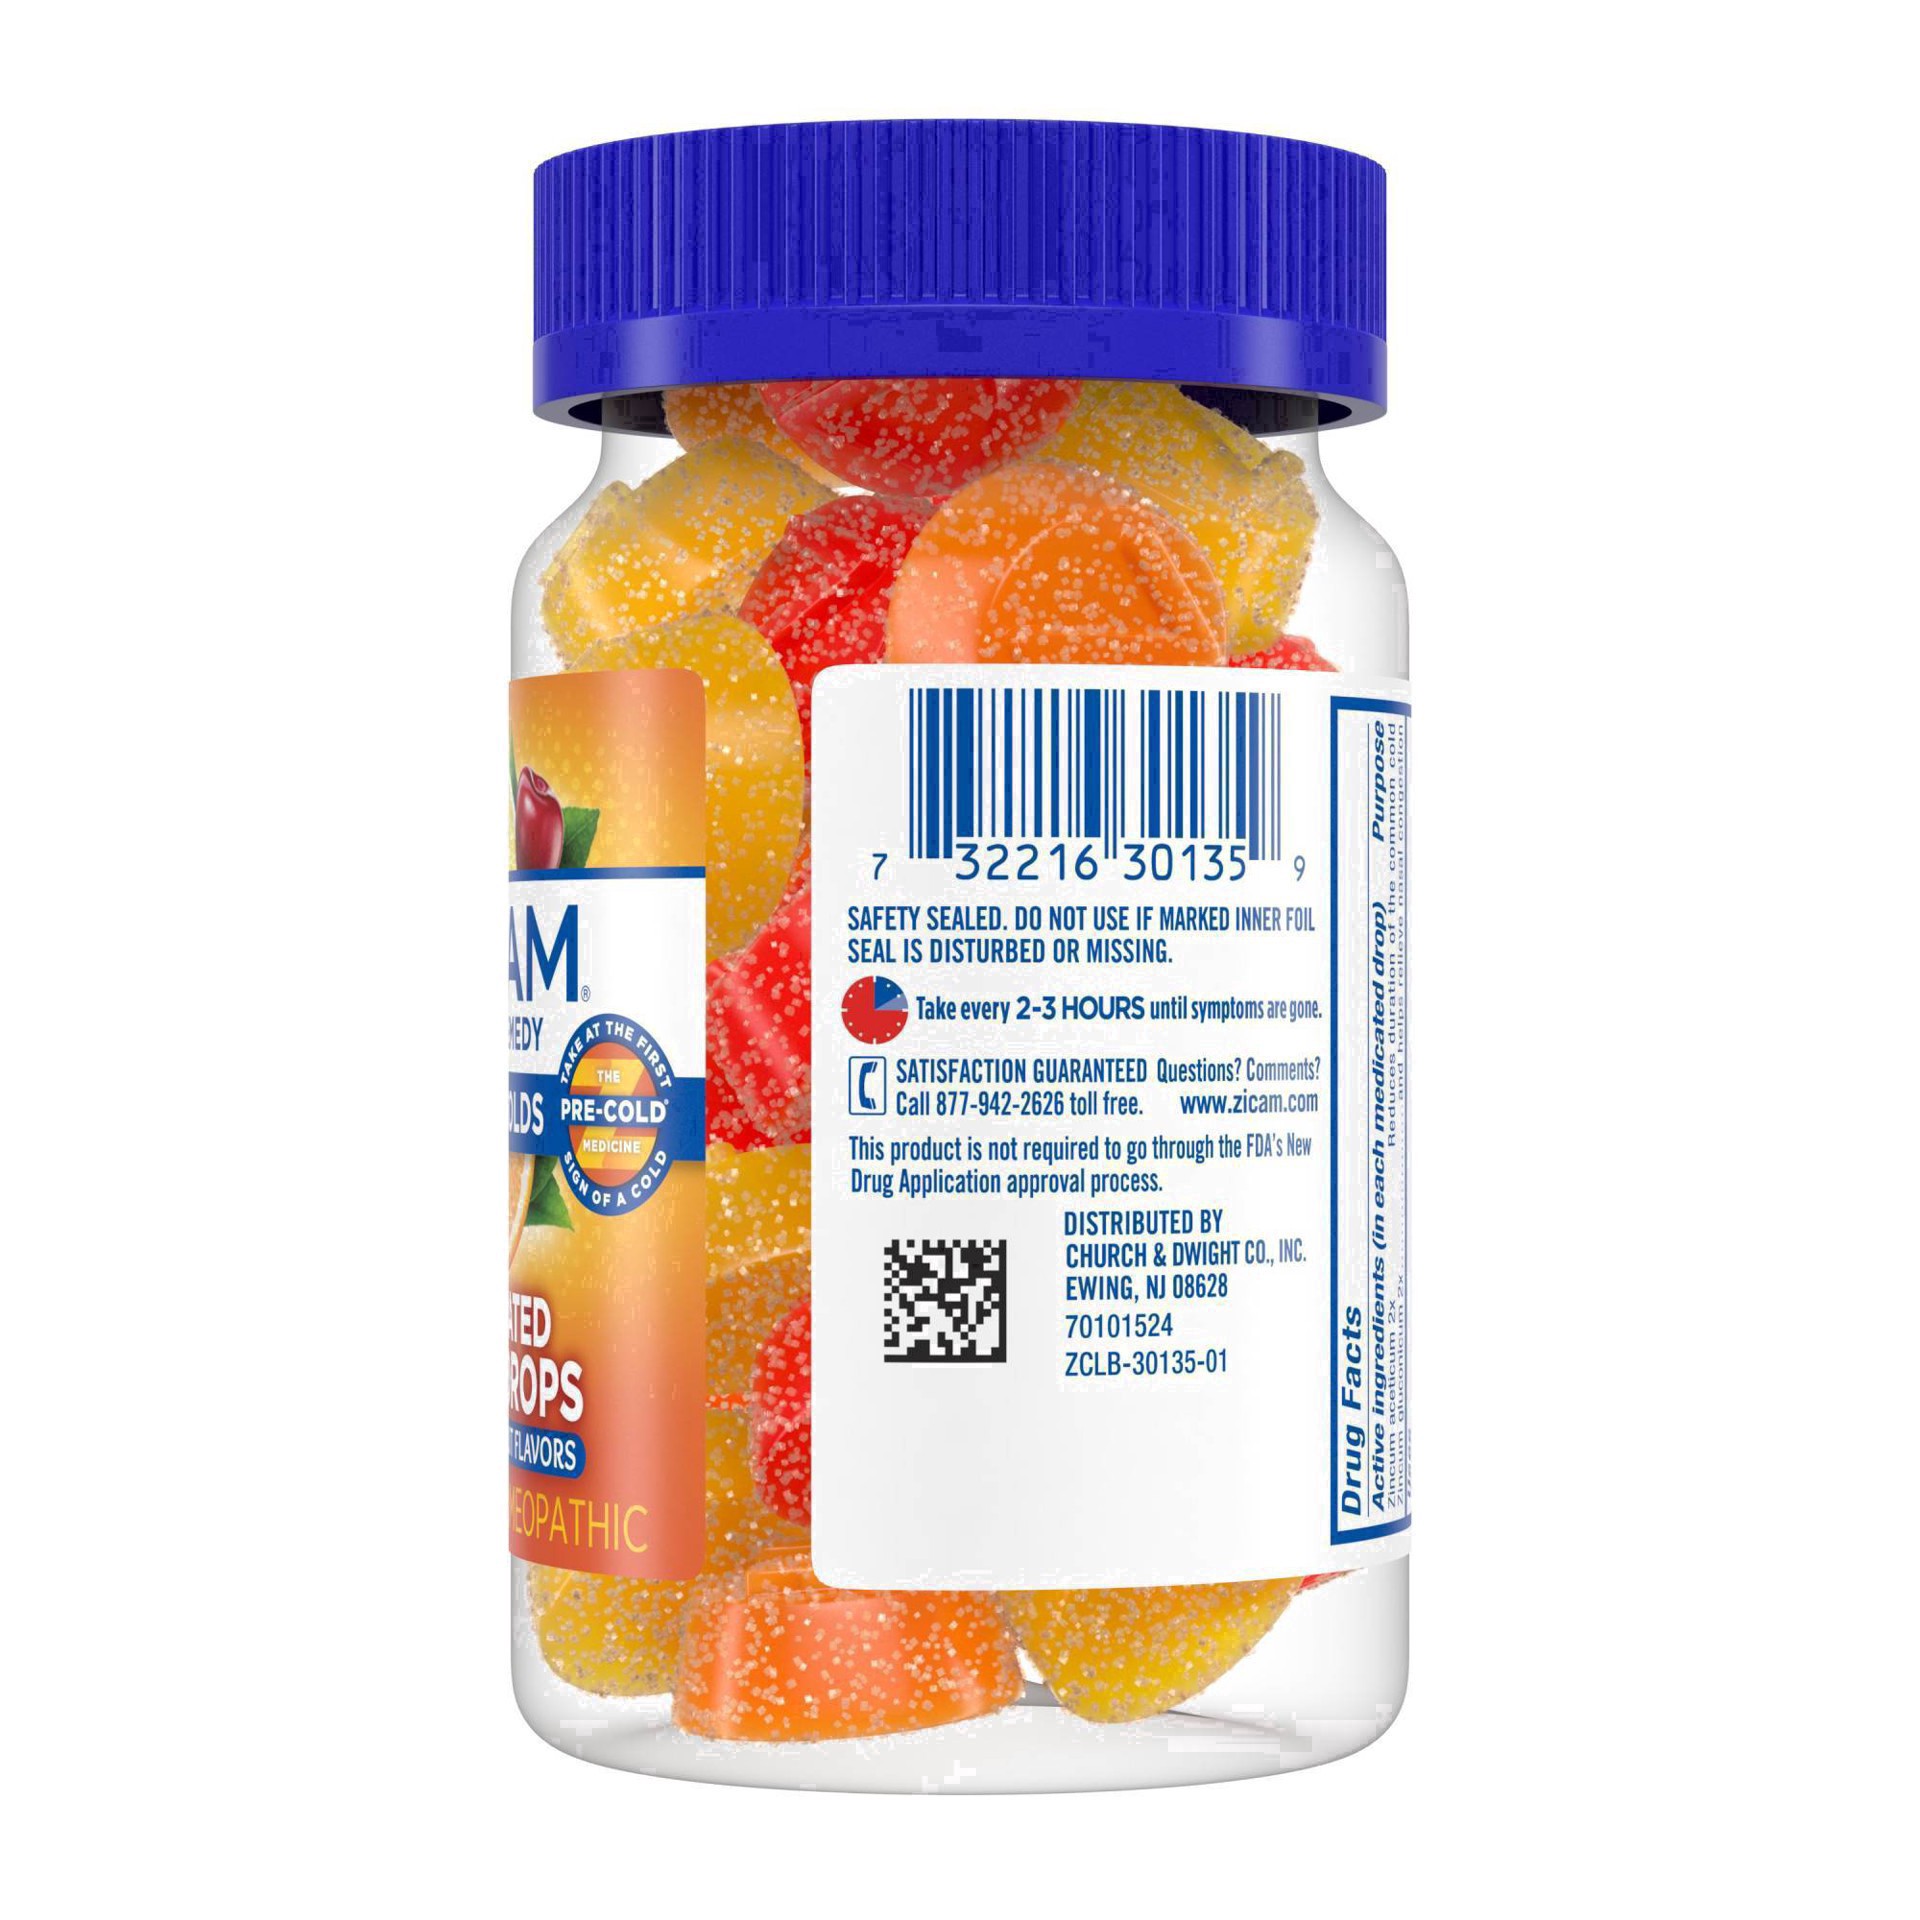 slide 27 of 58, Zicam Cold Remedy Medicated Drops - Fruit - 25ct, 25 ct